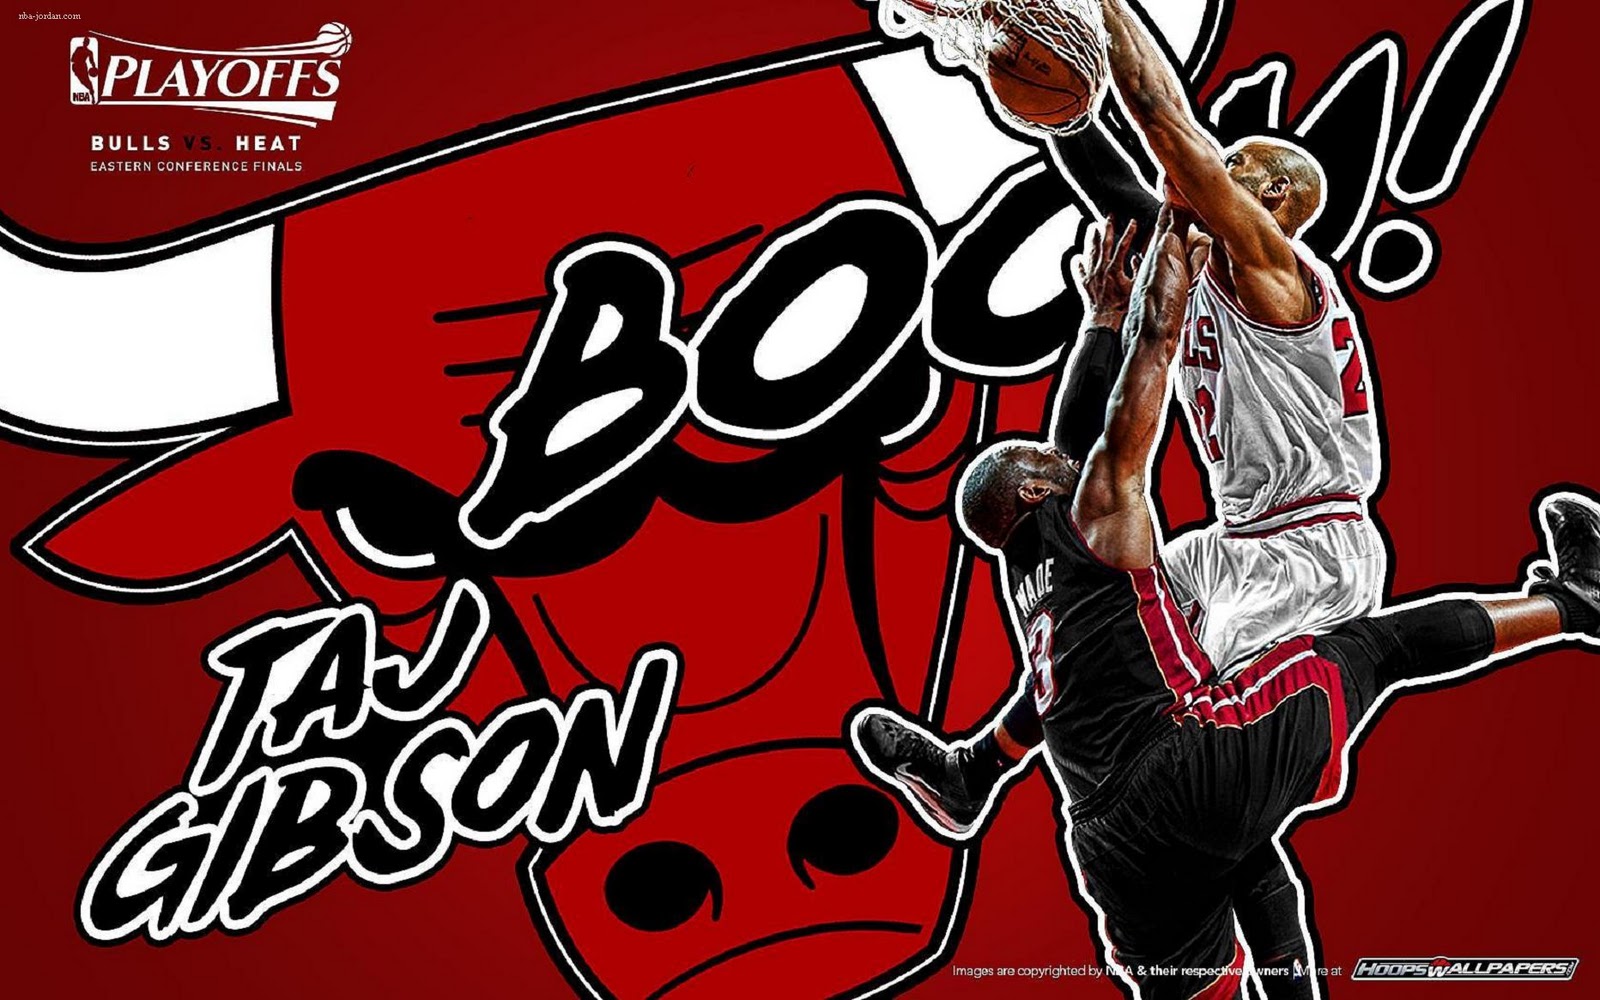 Nate Robinson Background Wallpapers 2833 - Amazing Wallpaperz